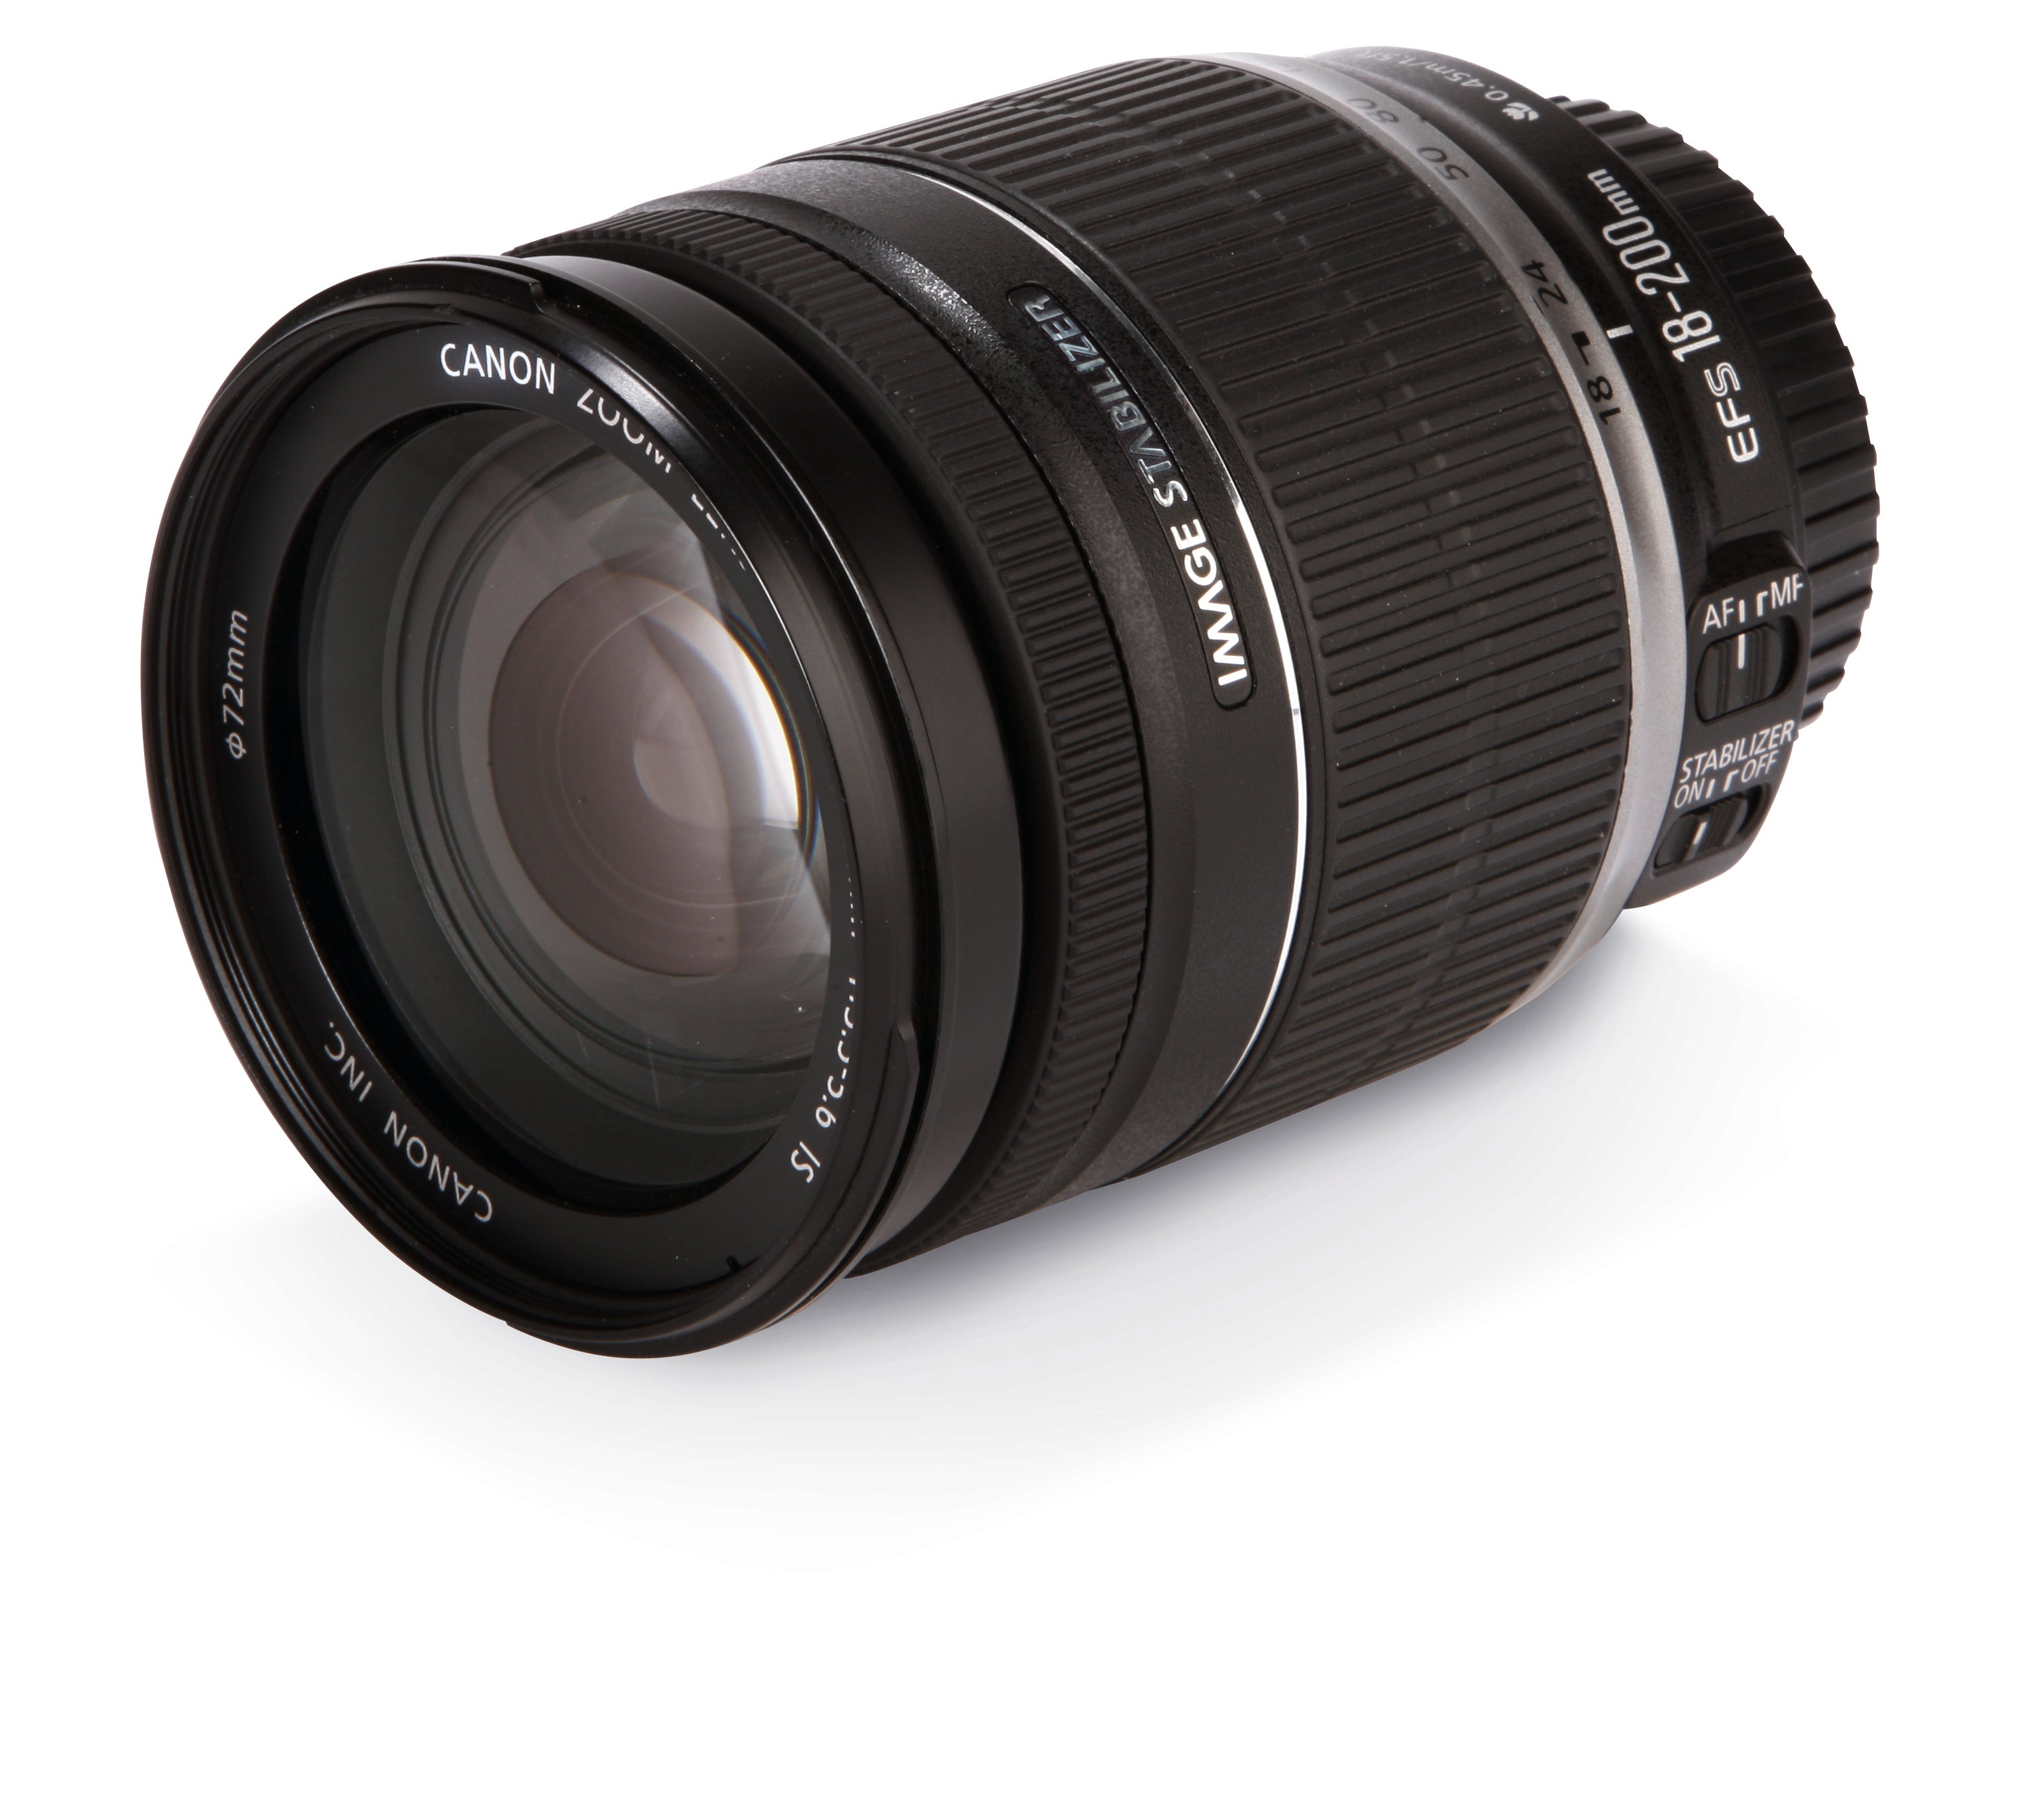 Canon EF-S 18-200mm f/3.5-5.6 IS Lens Review